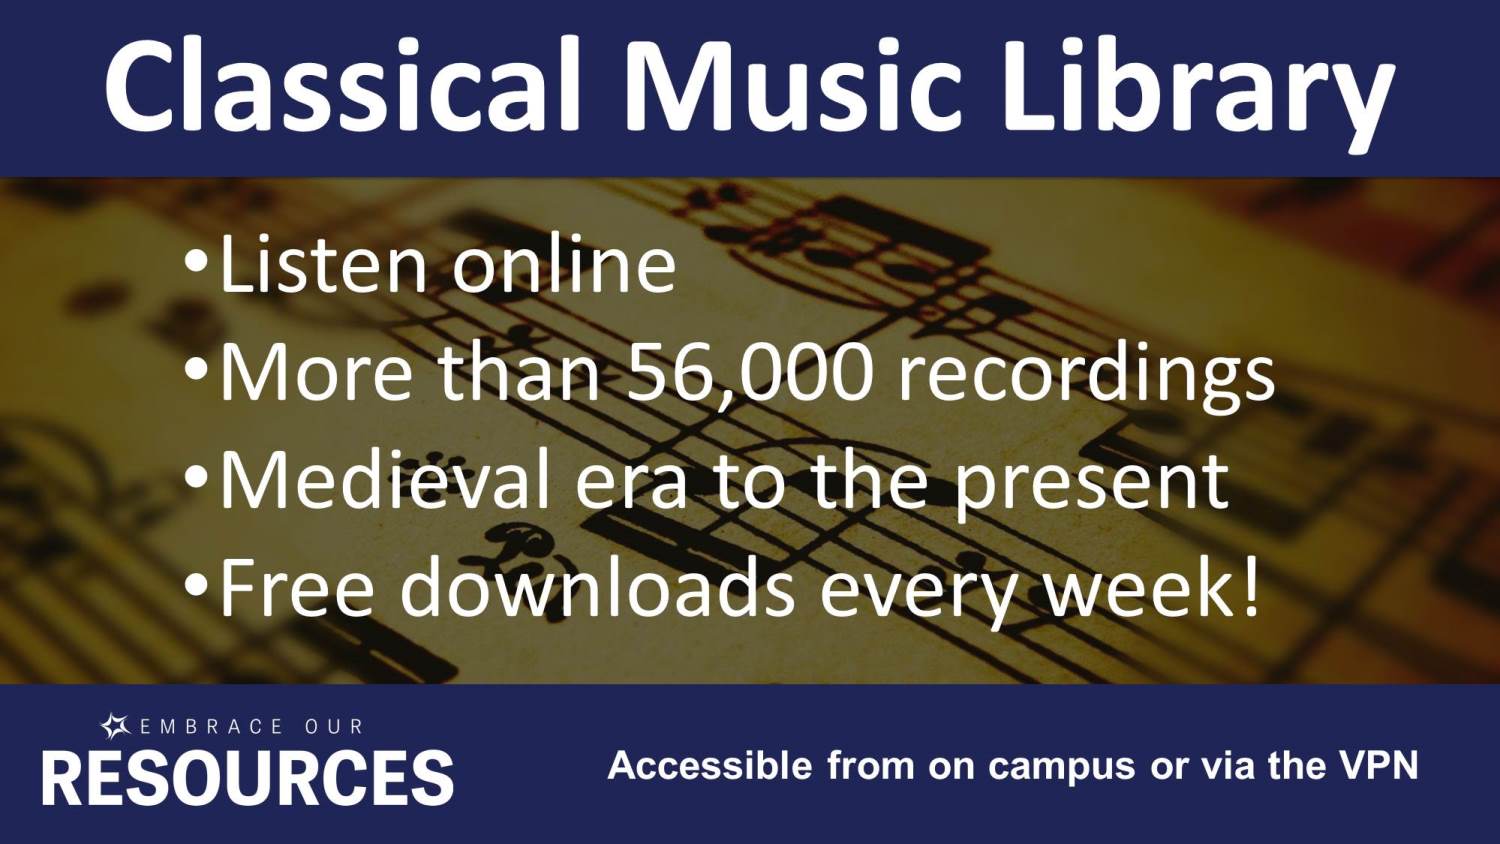 Classical Music Library